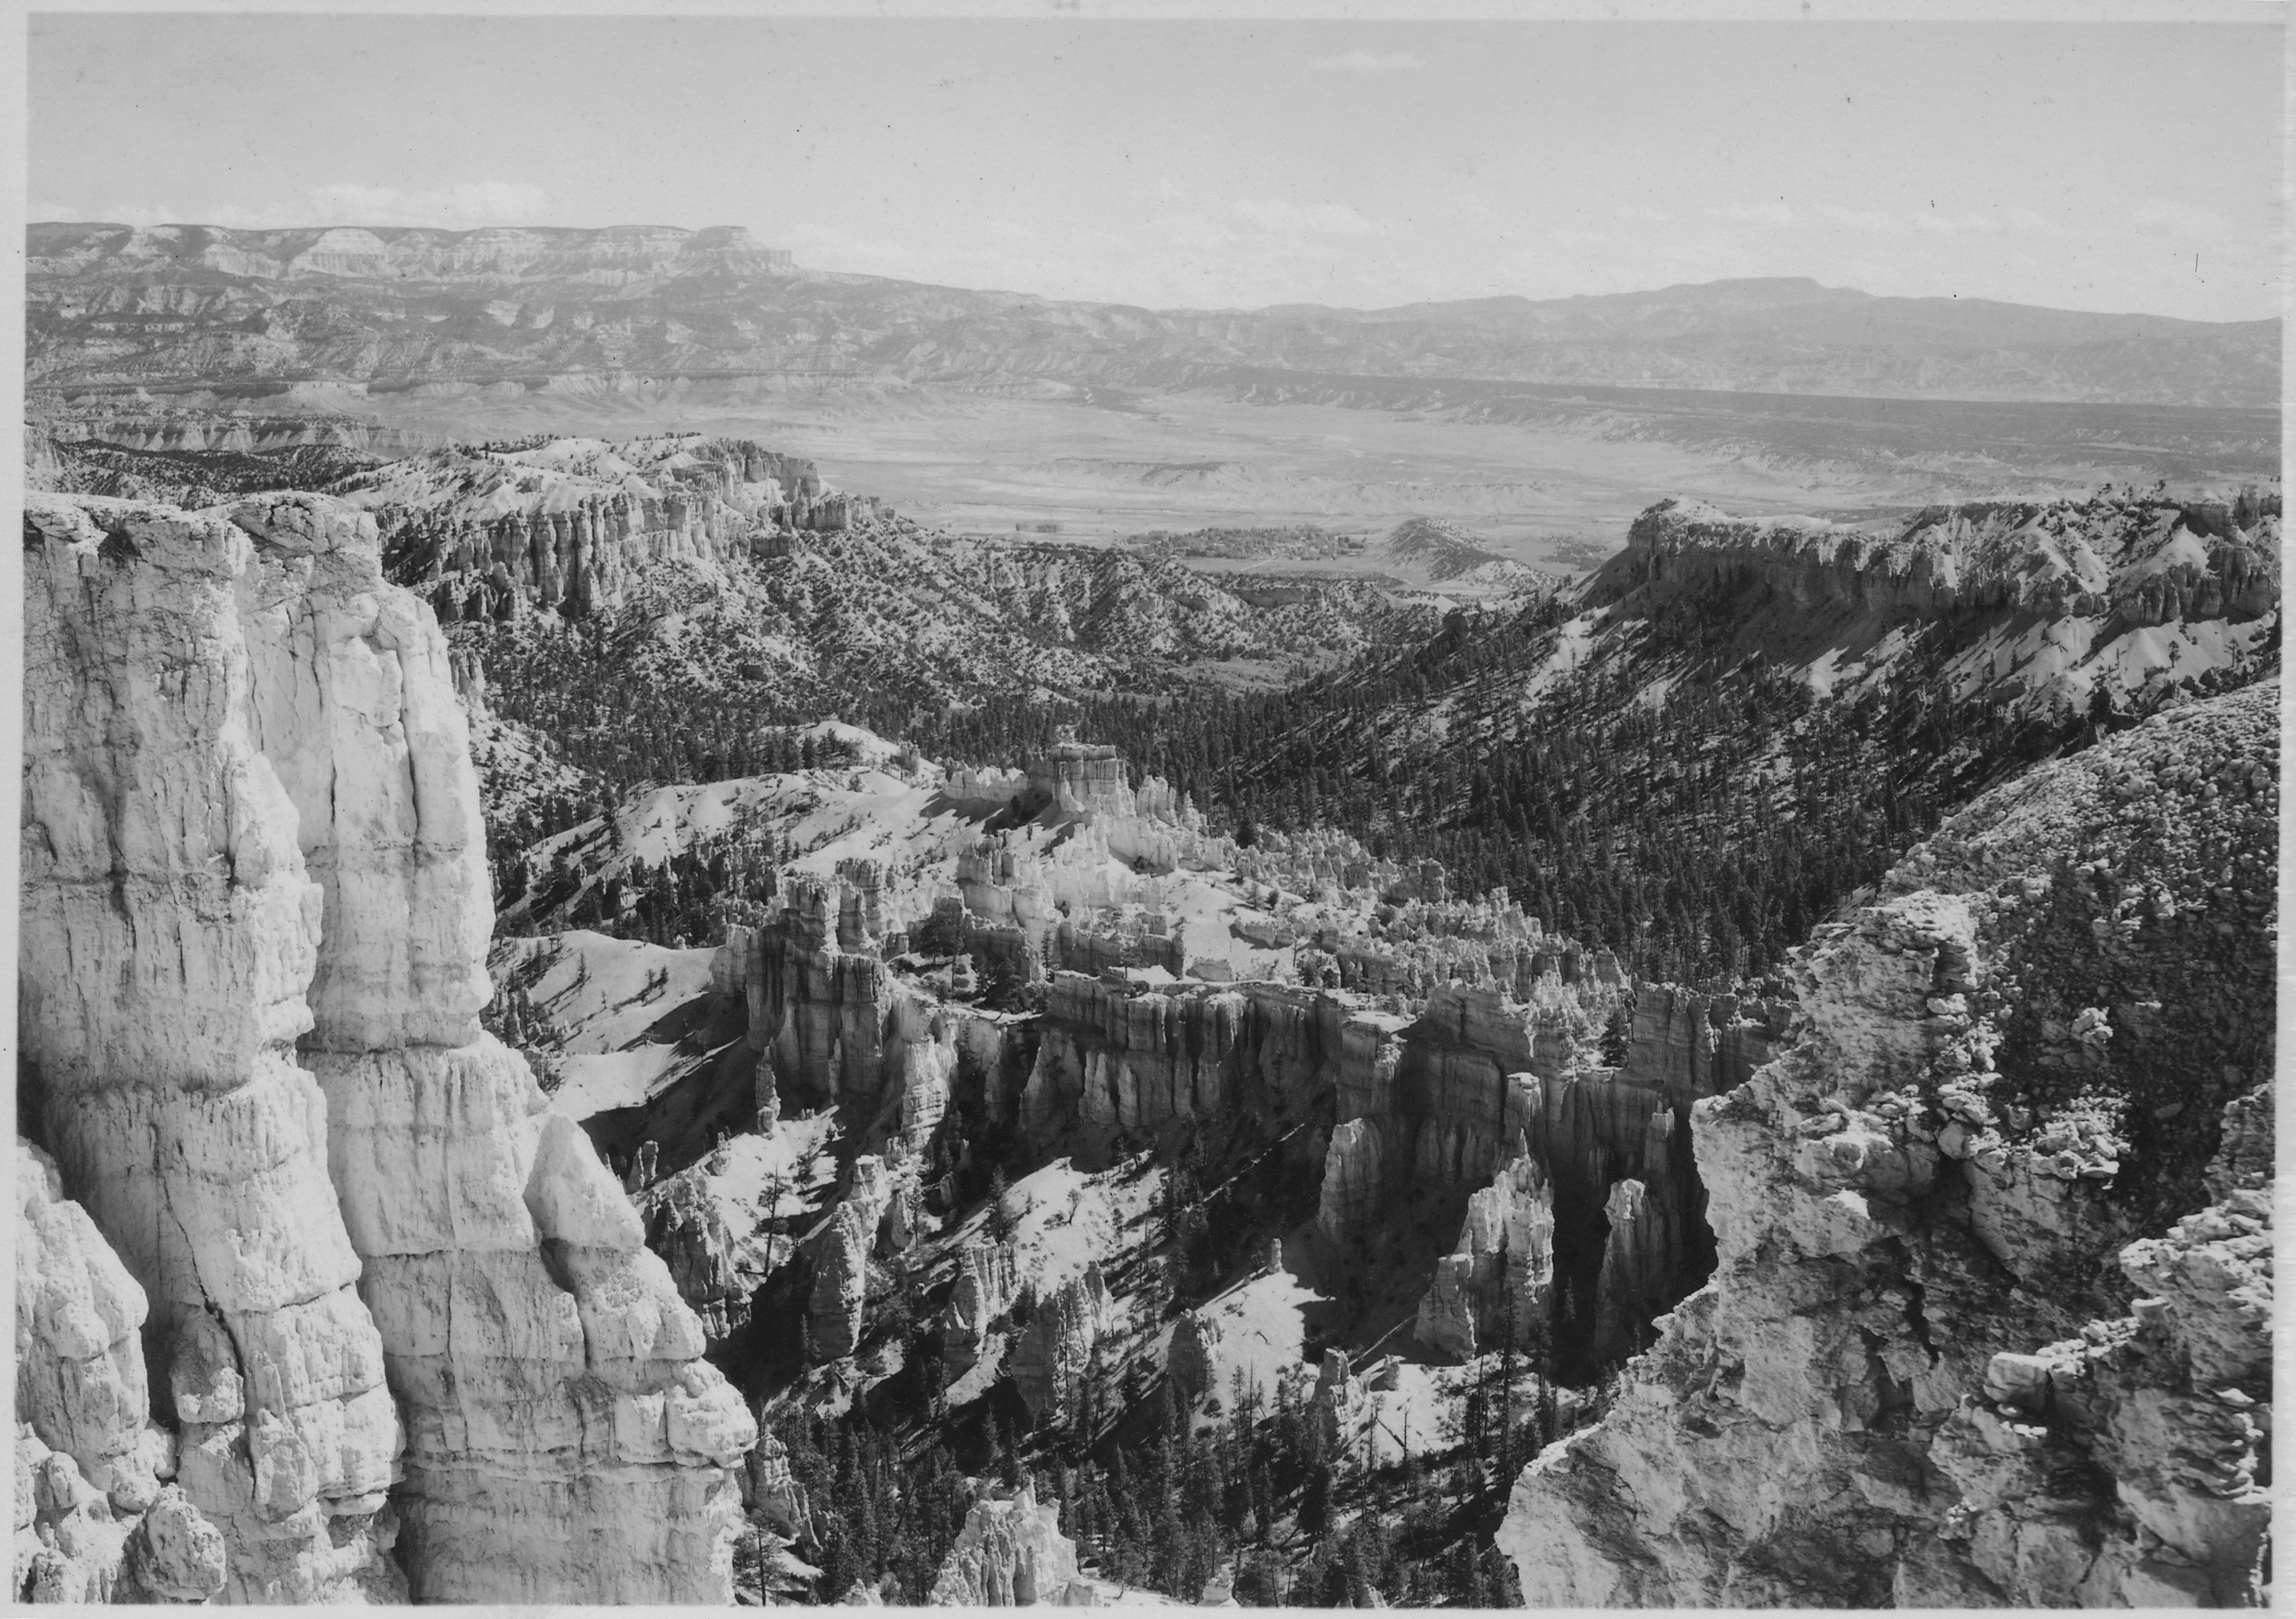 View east from Inspiration Point, rim of Bryce Canyon, showing Bryce Temple Ridge, the foot of the Canyon, the... - NARA - 520227